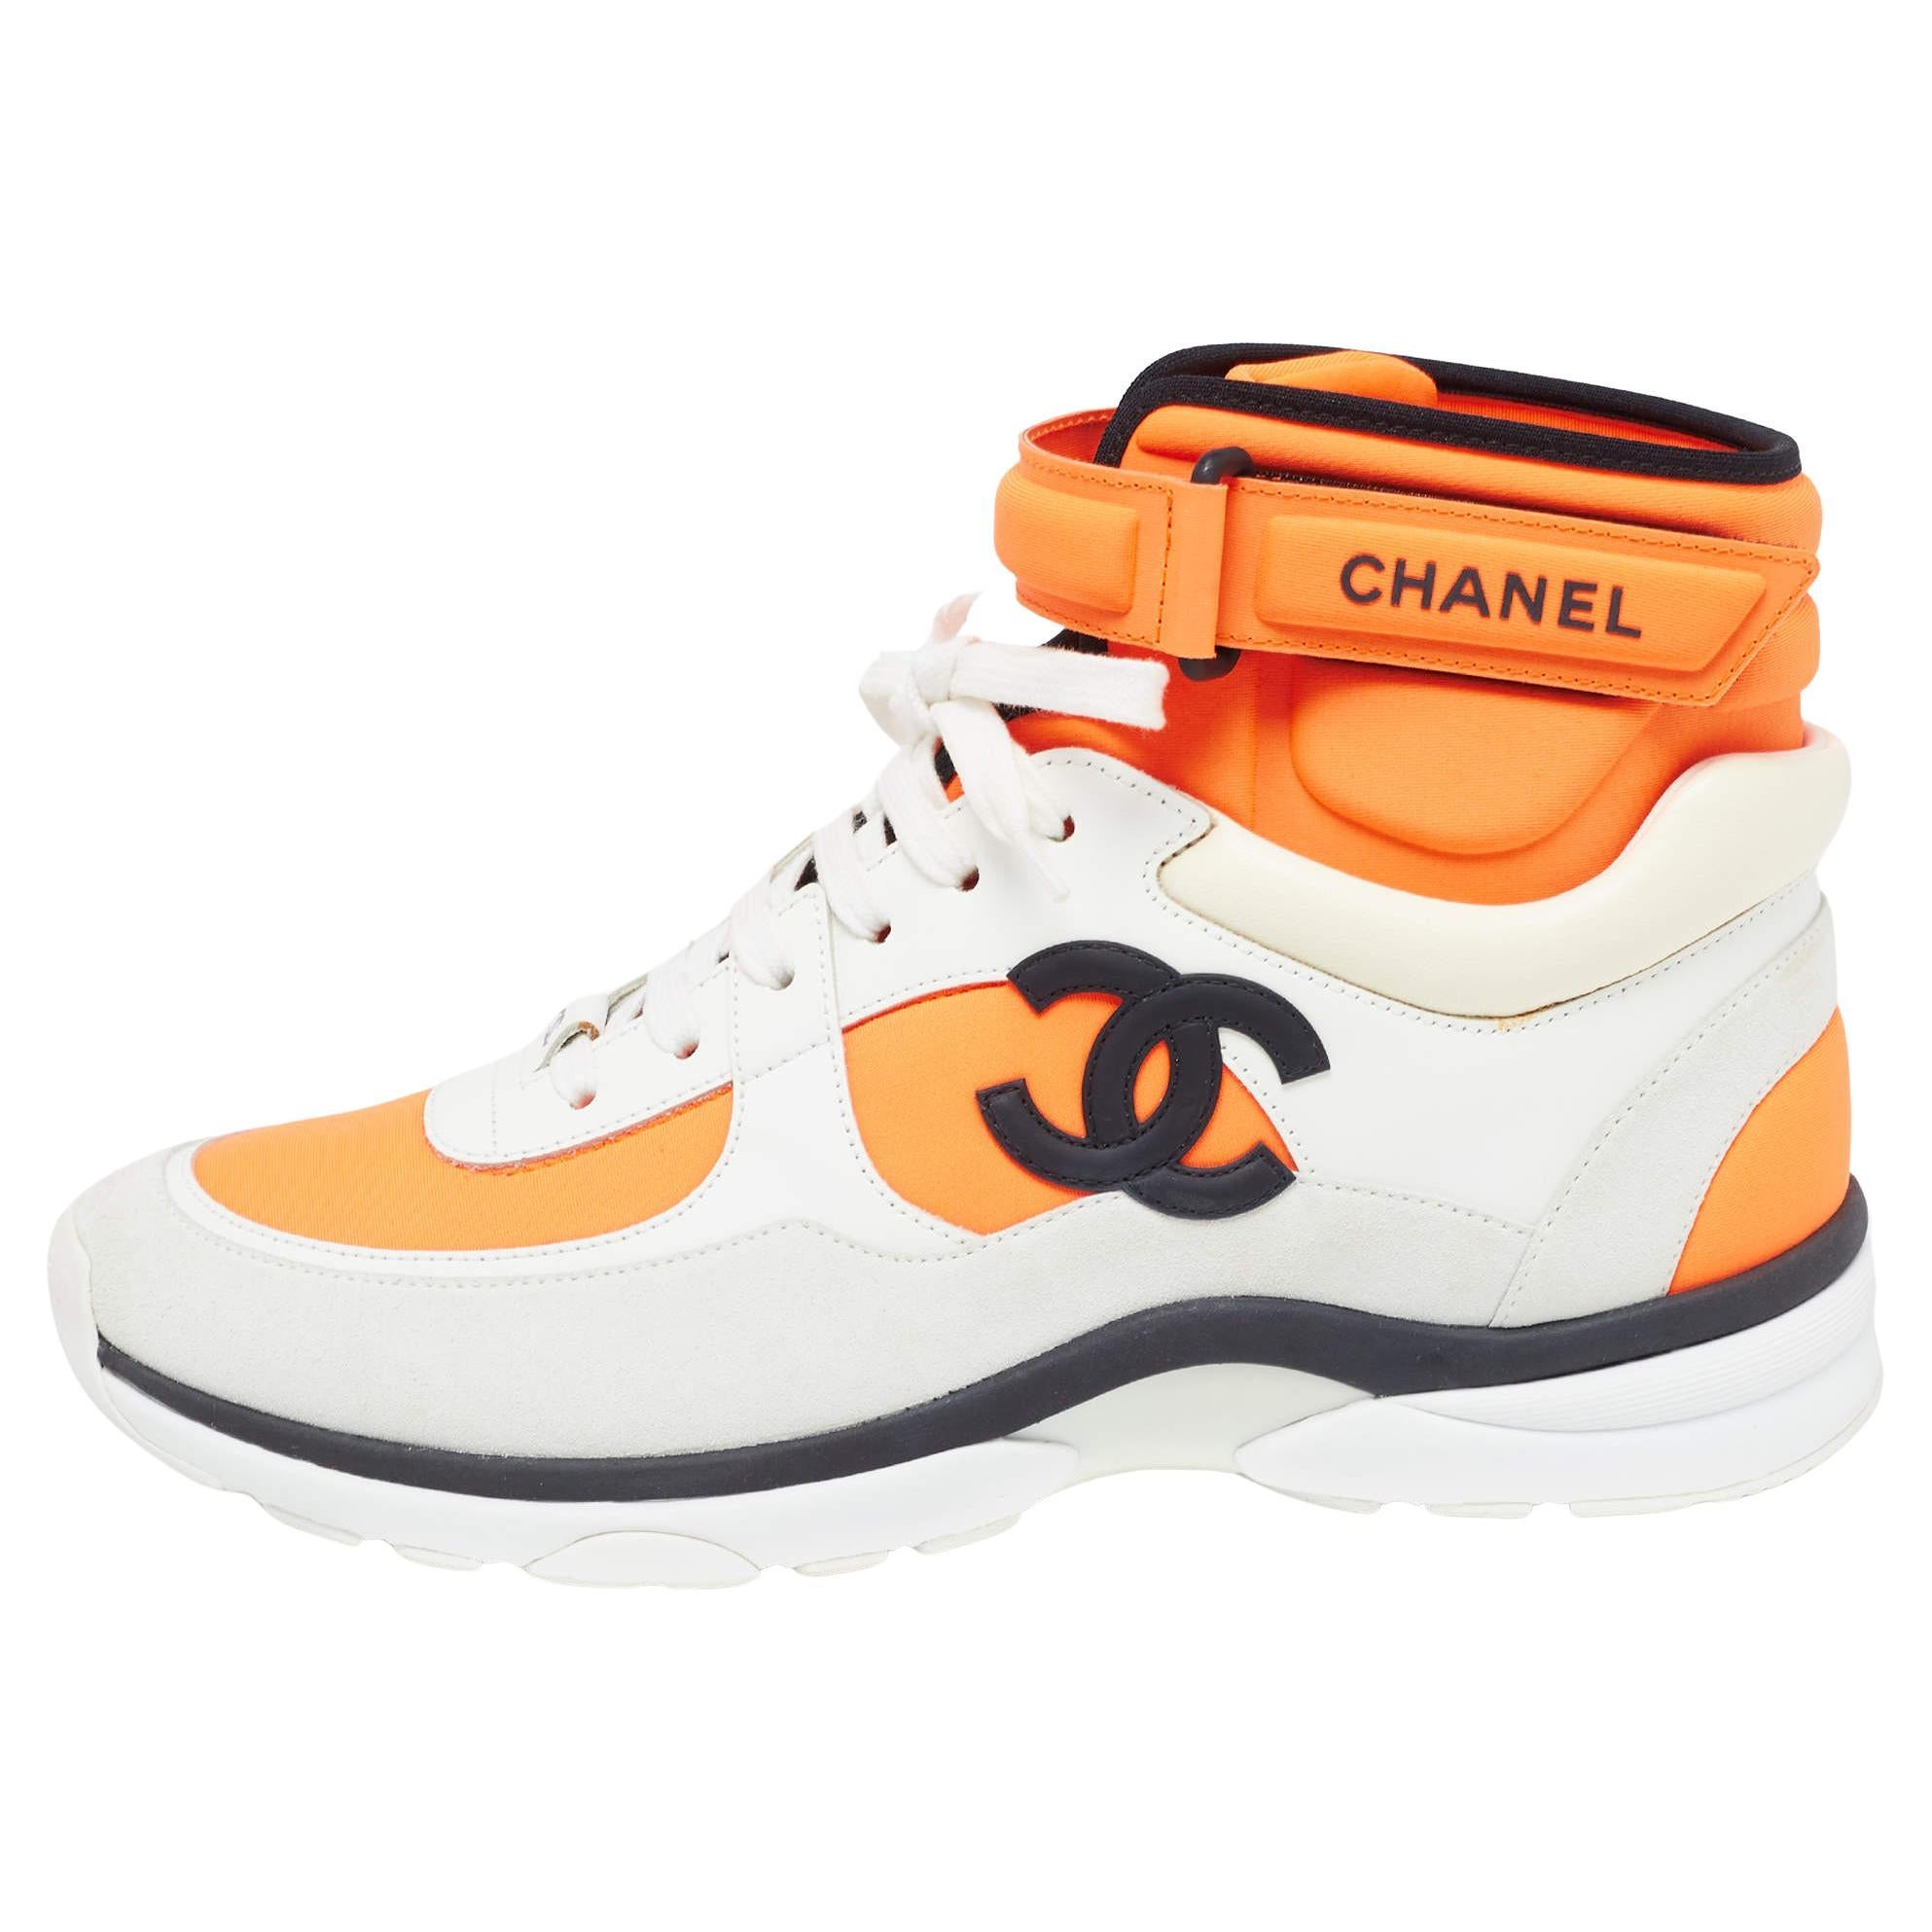 Chanel Neon Orange/White Neoprene and Leather CC High Top Sneakers Size 40.5 For Sale